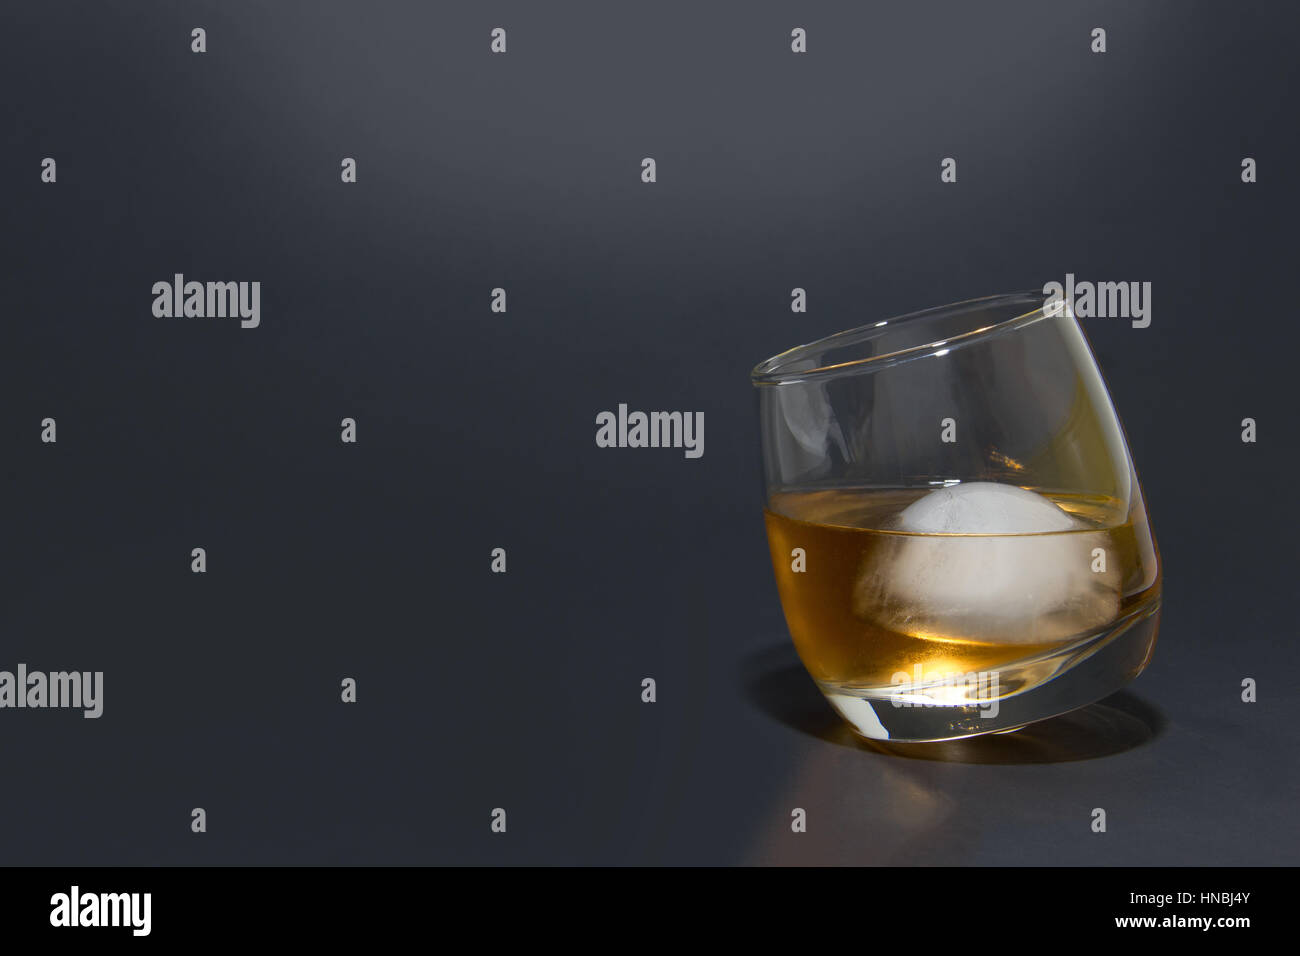 Whiskey on ice in a glass, copy space, black background Stock Photo